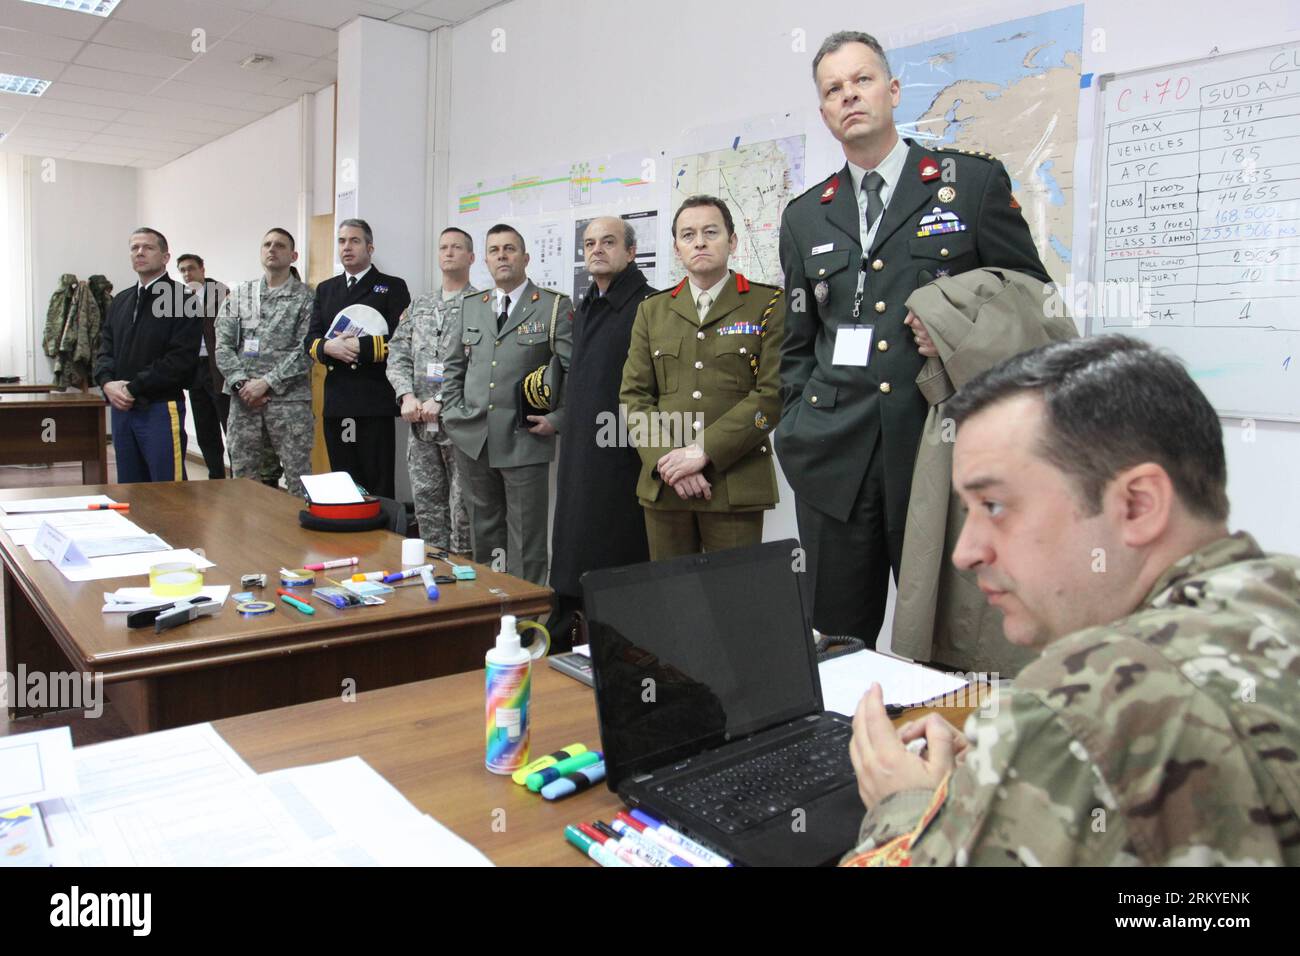 Bildnummer: 59211312  Datum: 12.02.2013  Copyright: imago/Xinhua (130212) -- SARAJEVO, Feb. 12, 2013 (Xinhua) -- Senior officials listen to a presentation of LOGEX 13 logistic military excercise at a military base in Sarajevo, Bosnia-Herzegovina (BiH), on Feb. 12, 2013. BiH is hosting the International Logistic Exercise 2013 (LOGEX 13) from Feb. 4 to Feb. 15 in Sarajevo. About 200 soldiers from NATO and member states of Partnership for Peace (PfP) took part in the exercise. (Xinhua/Haris Memija) (zy) BIH-LOGEX 13-EXERCISE PUBLICATIONxNOTxINxCHN Politik Militär PK Armee People x0x xdd premiumd Stock Photo